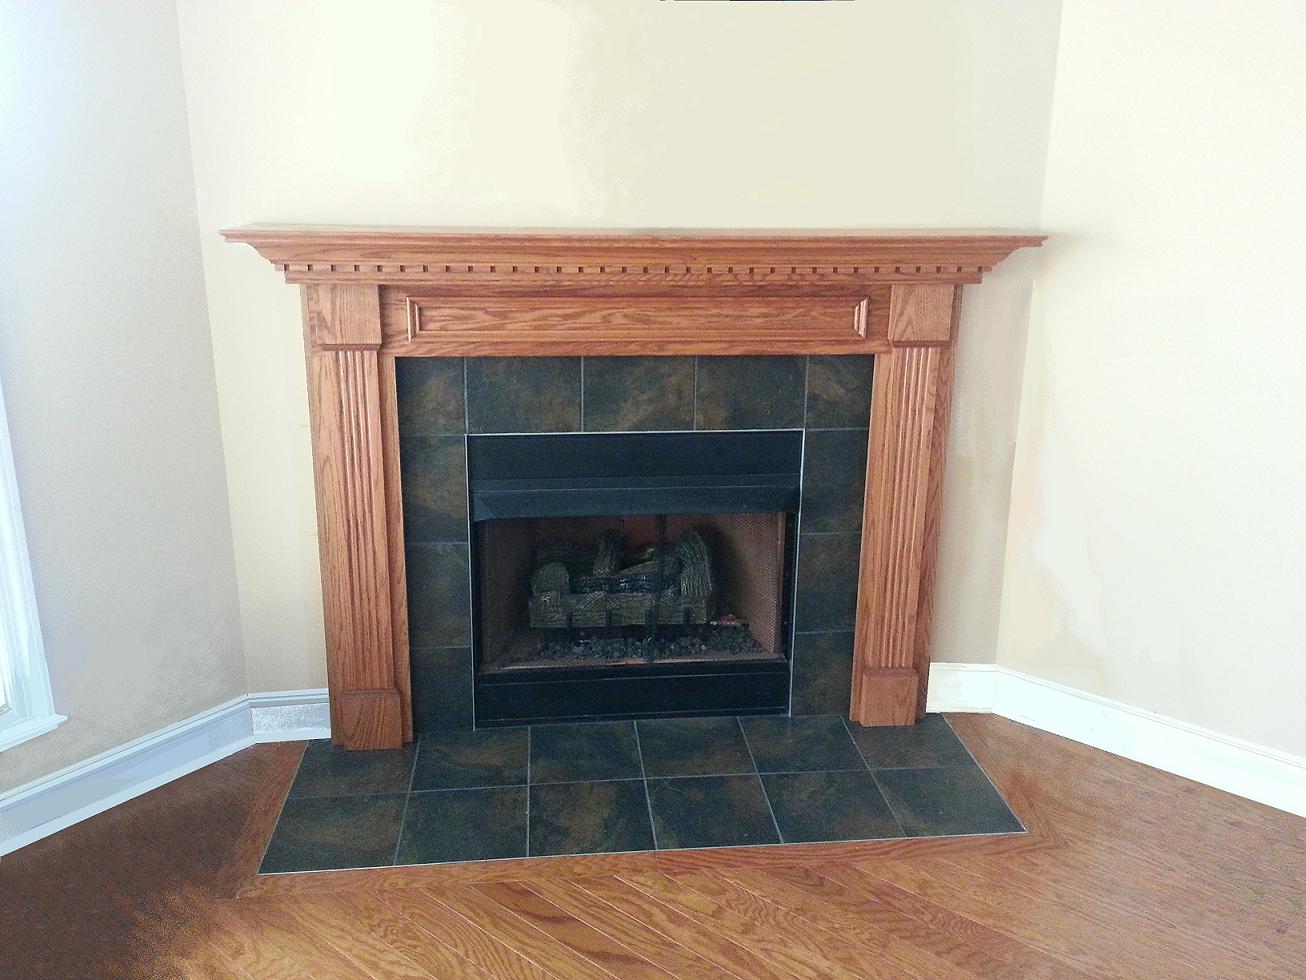 Fireplace Mantel installed by consumer | DIY Fireplace Makeover